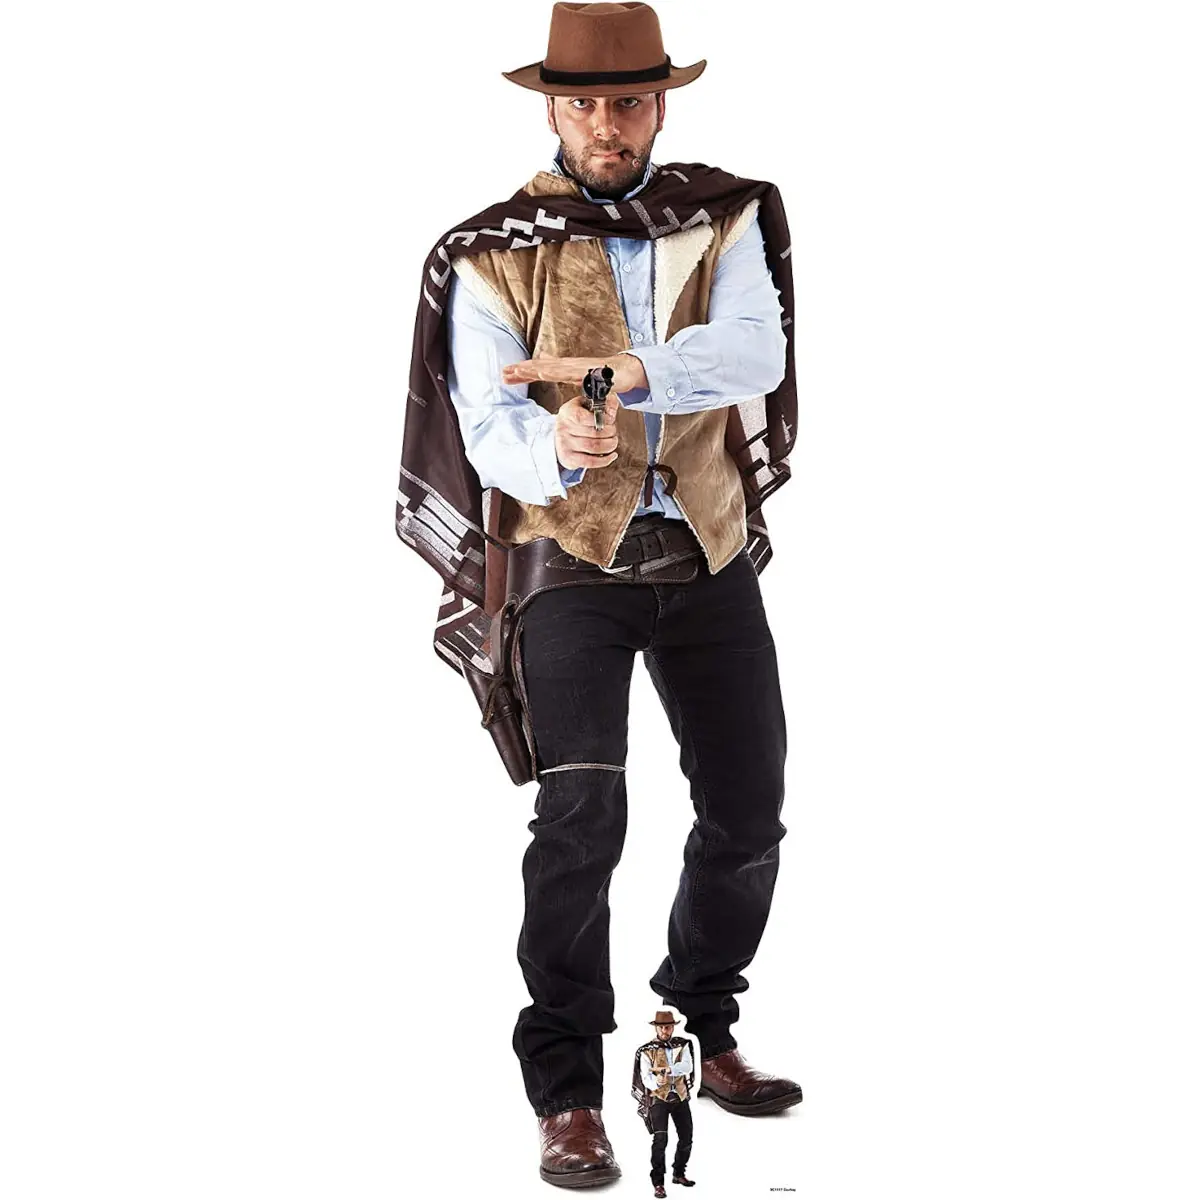 Cowboy Lifesize + Mini Cardboard Cutout / Standee - Cutouts & Collectables